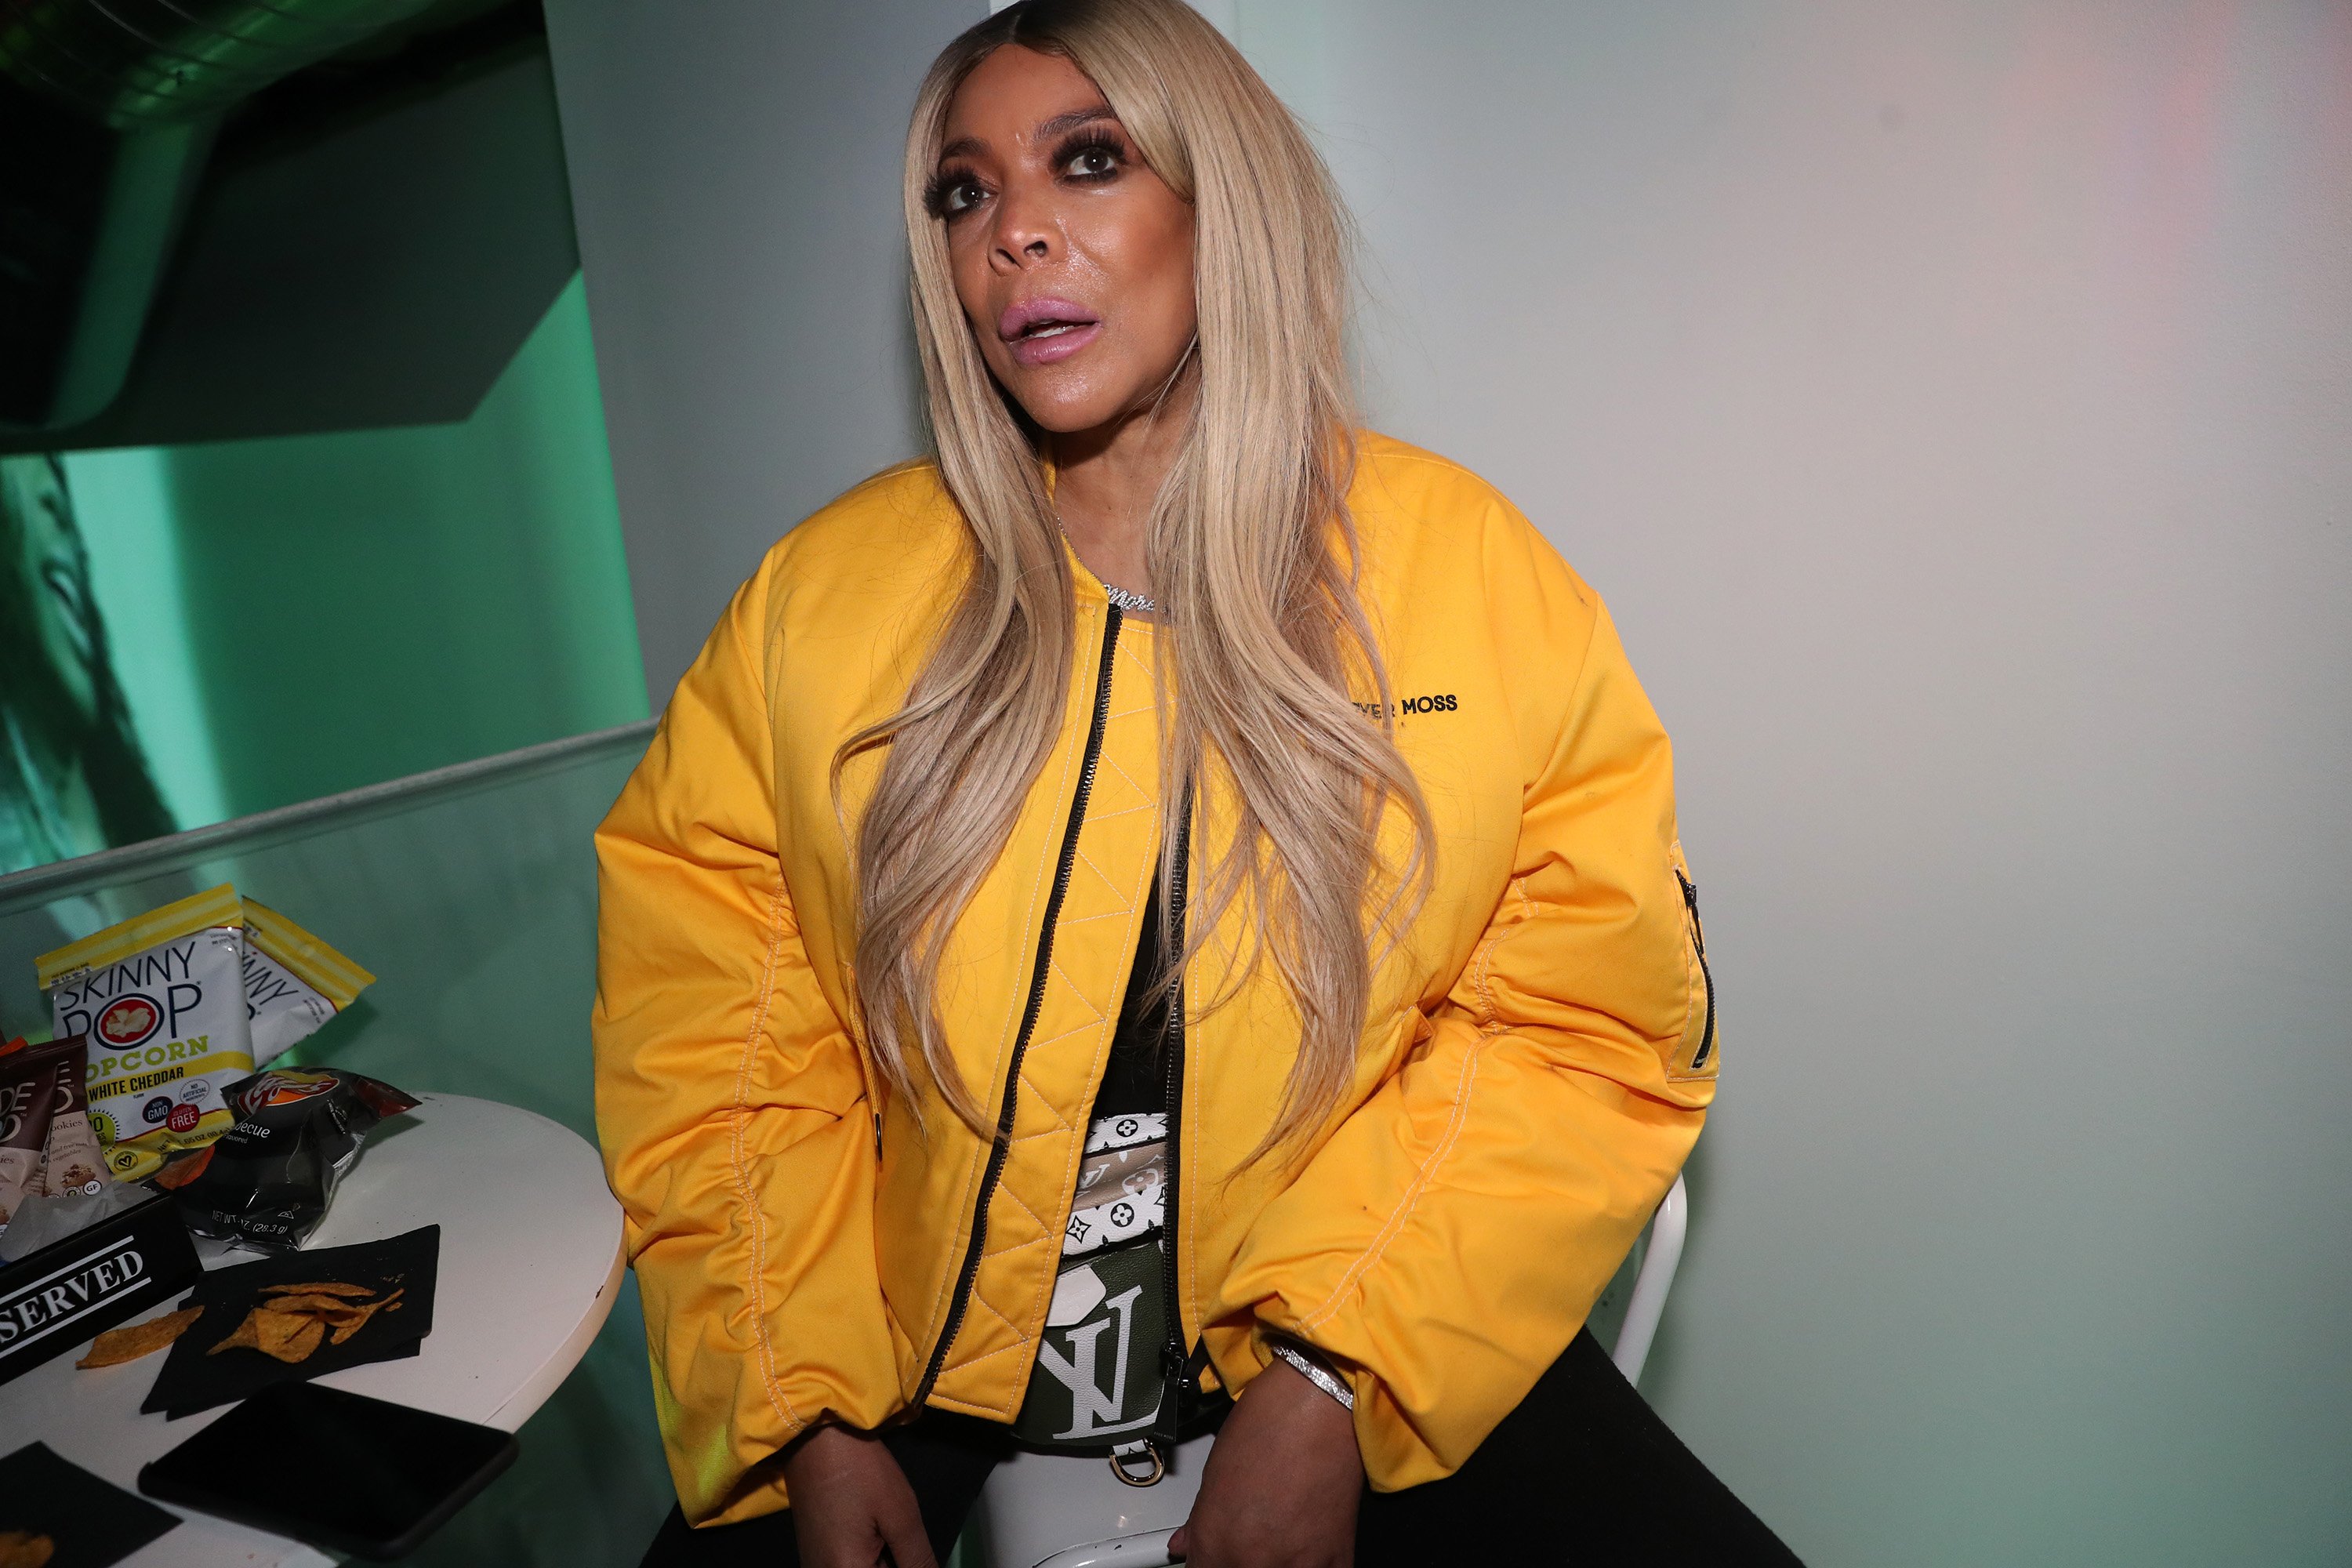 Wendy Williams attends event for a documentary called 'New Cash Order'